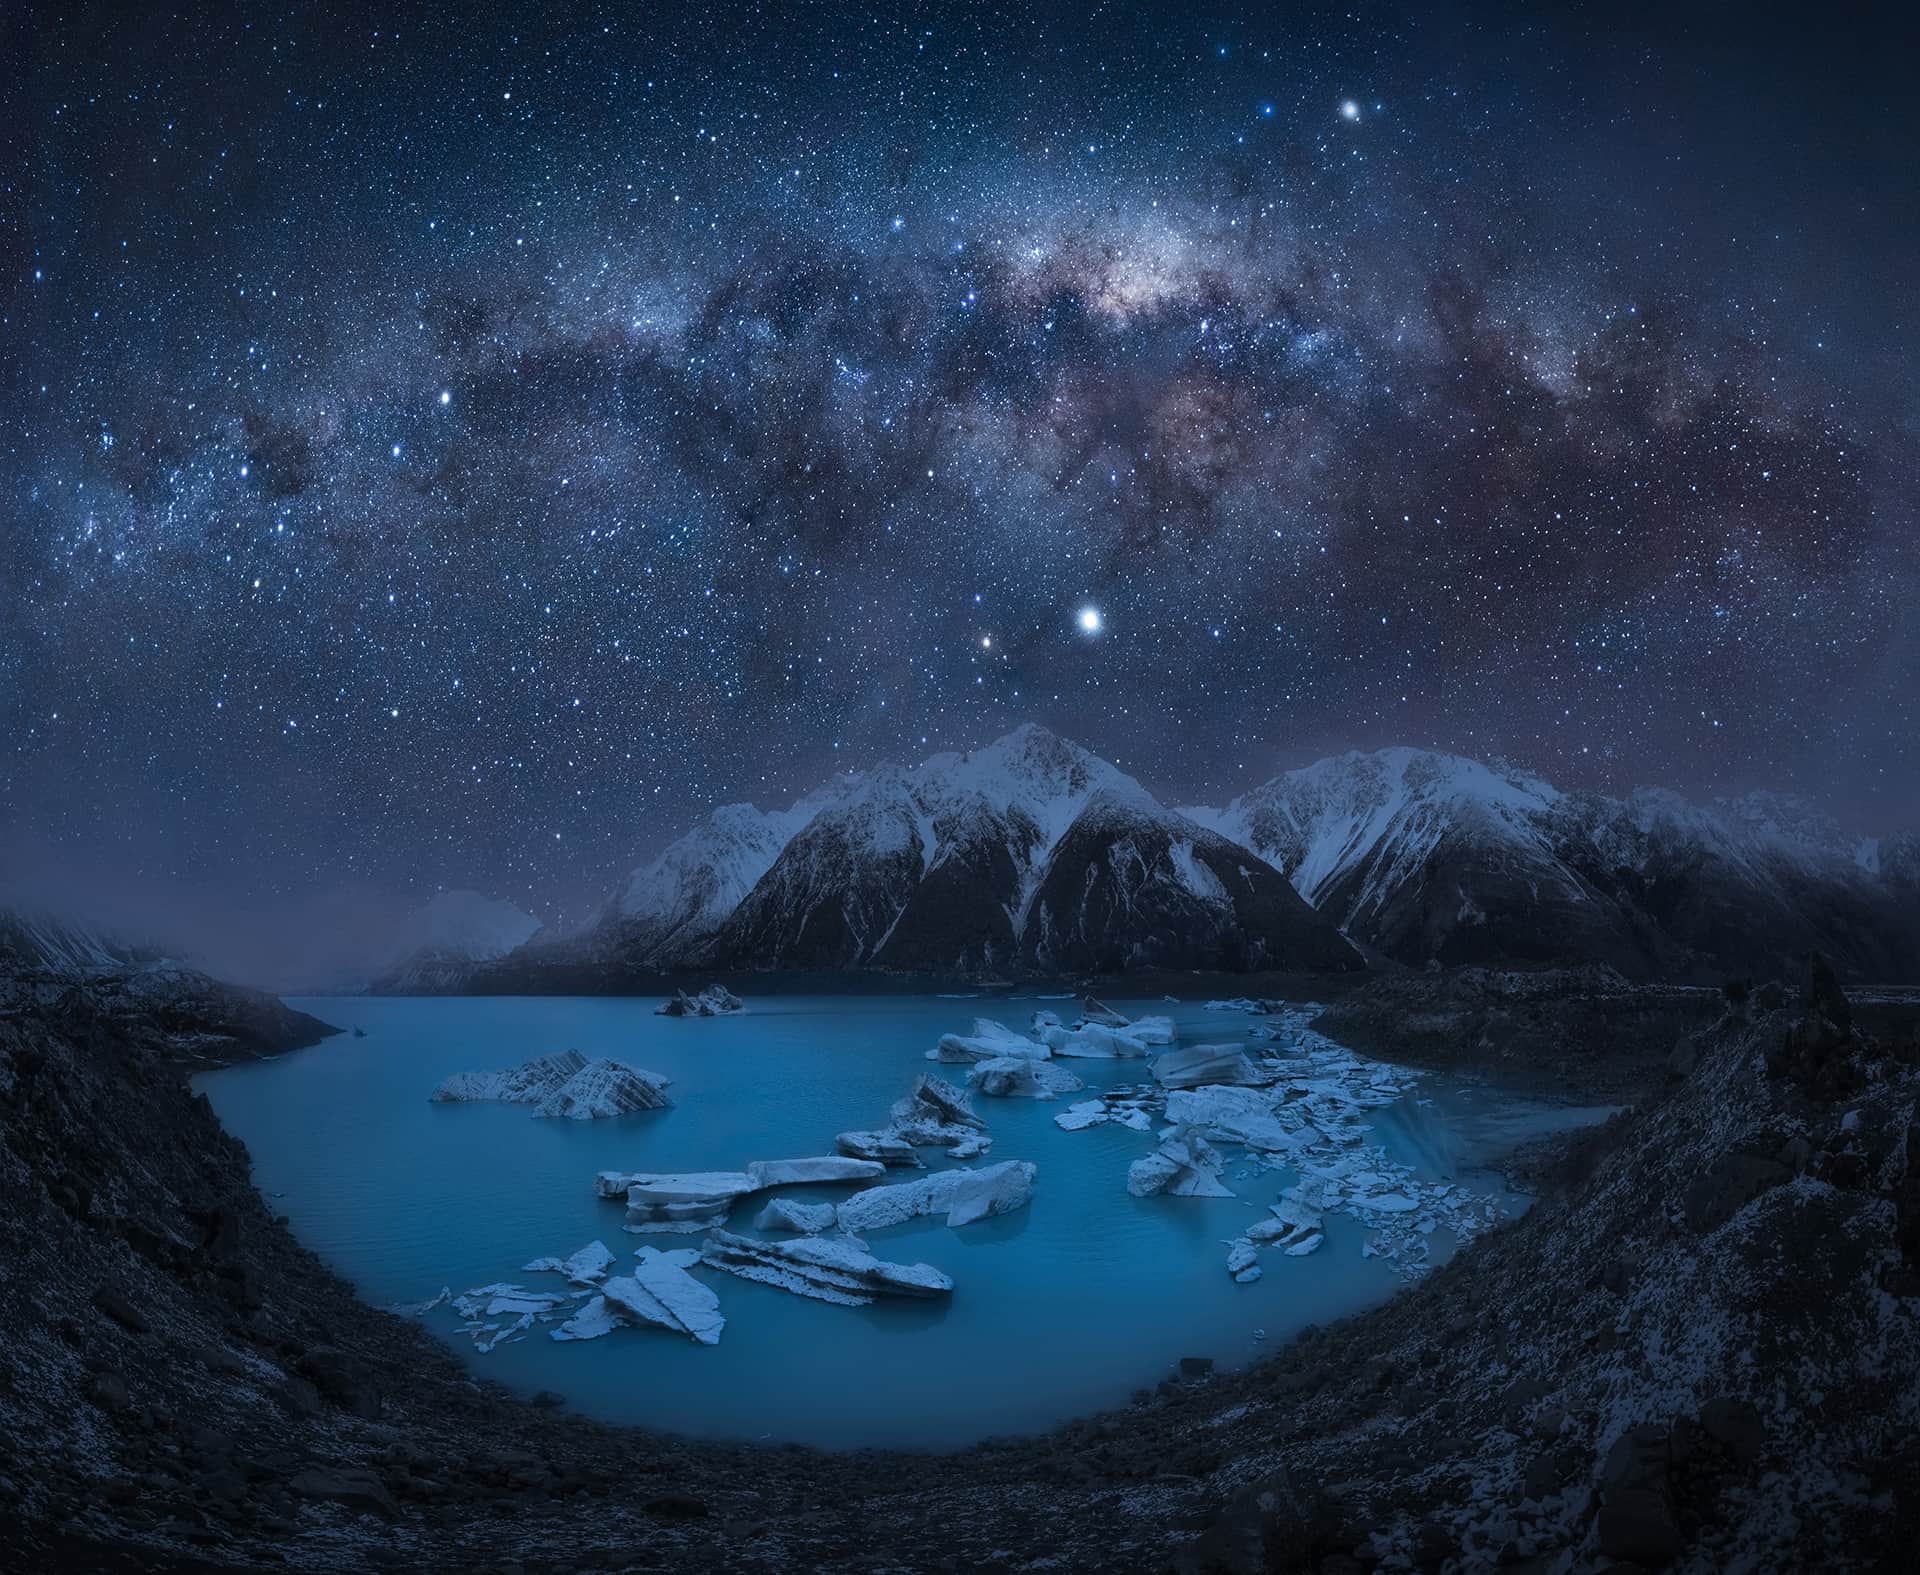 Best places to see the Milky Way Southern Hemisphere